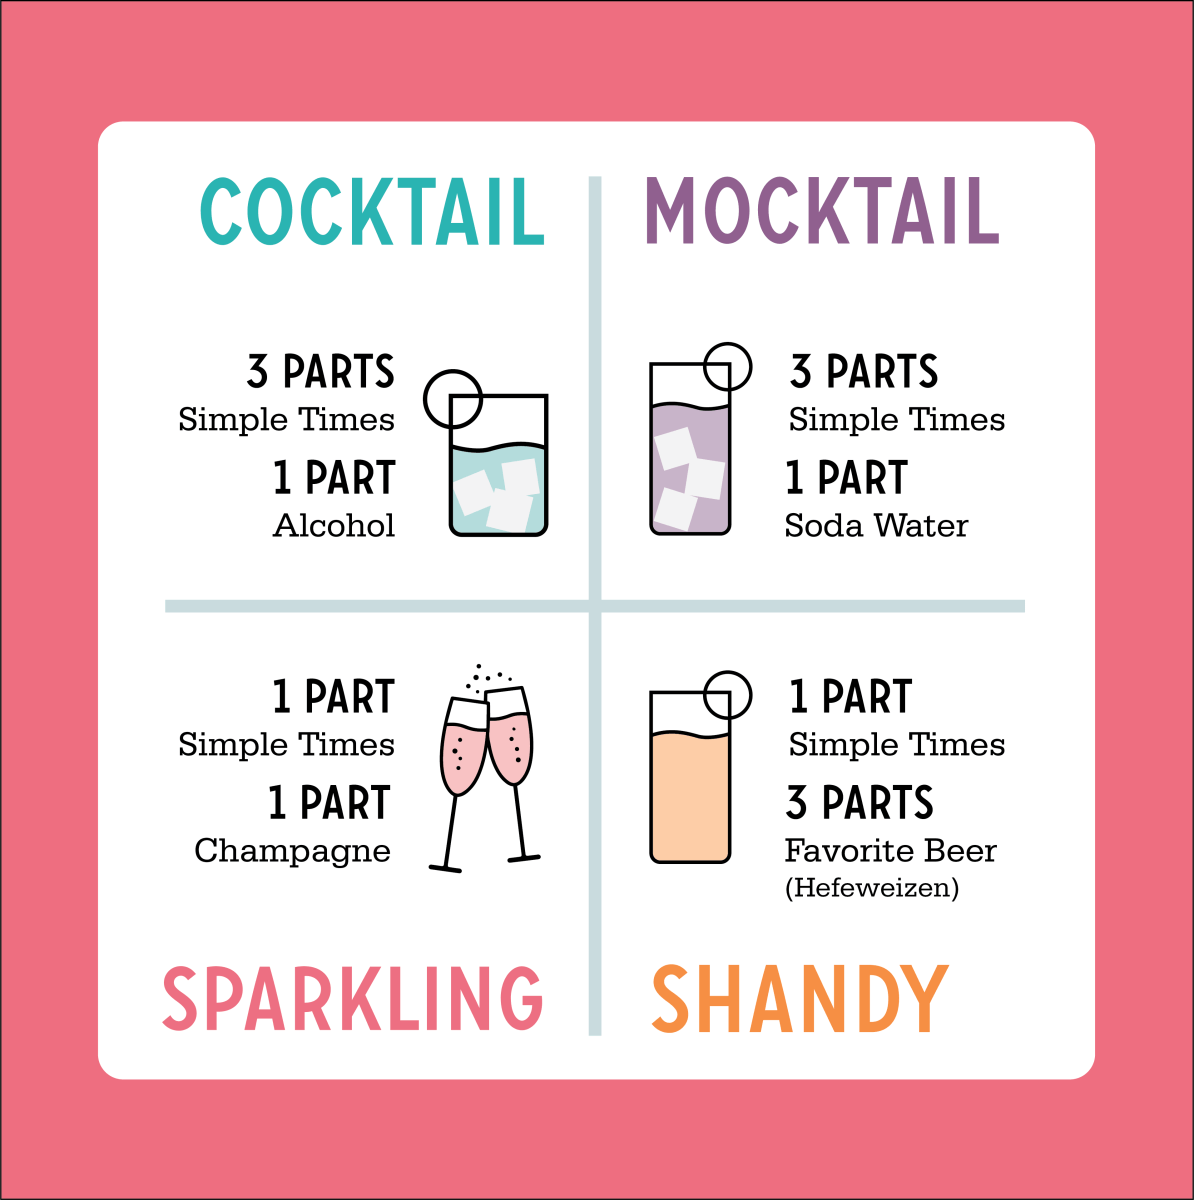 Cocktail Mixers - Alcohol Mixers - Simple Times Mixers - Kiwi Mule